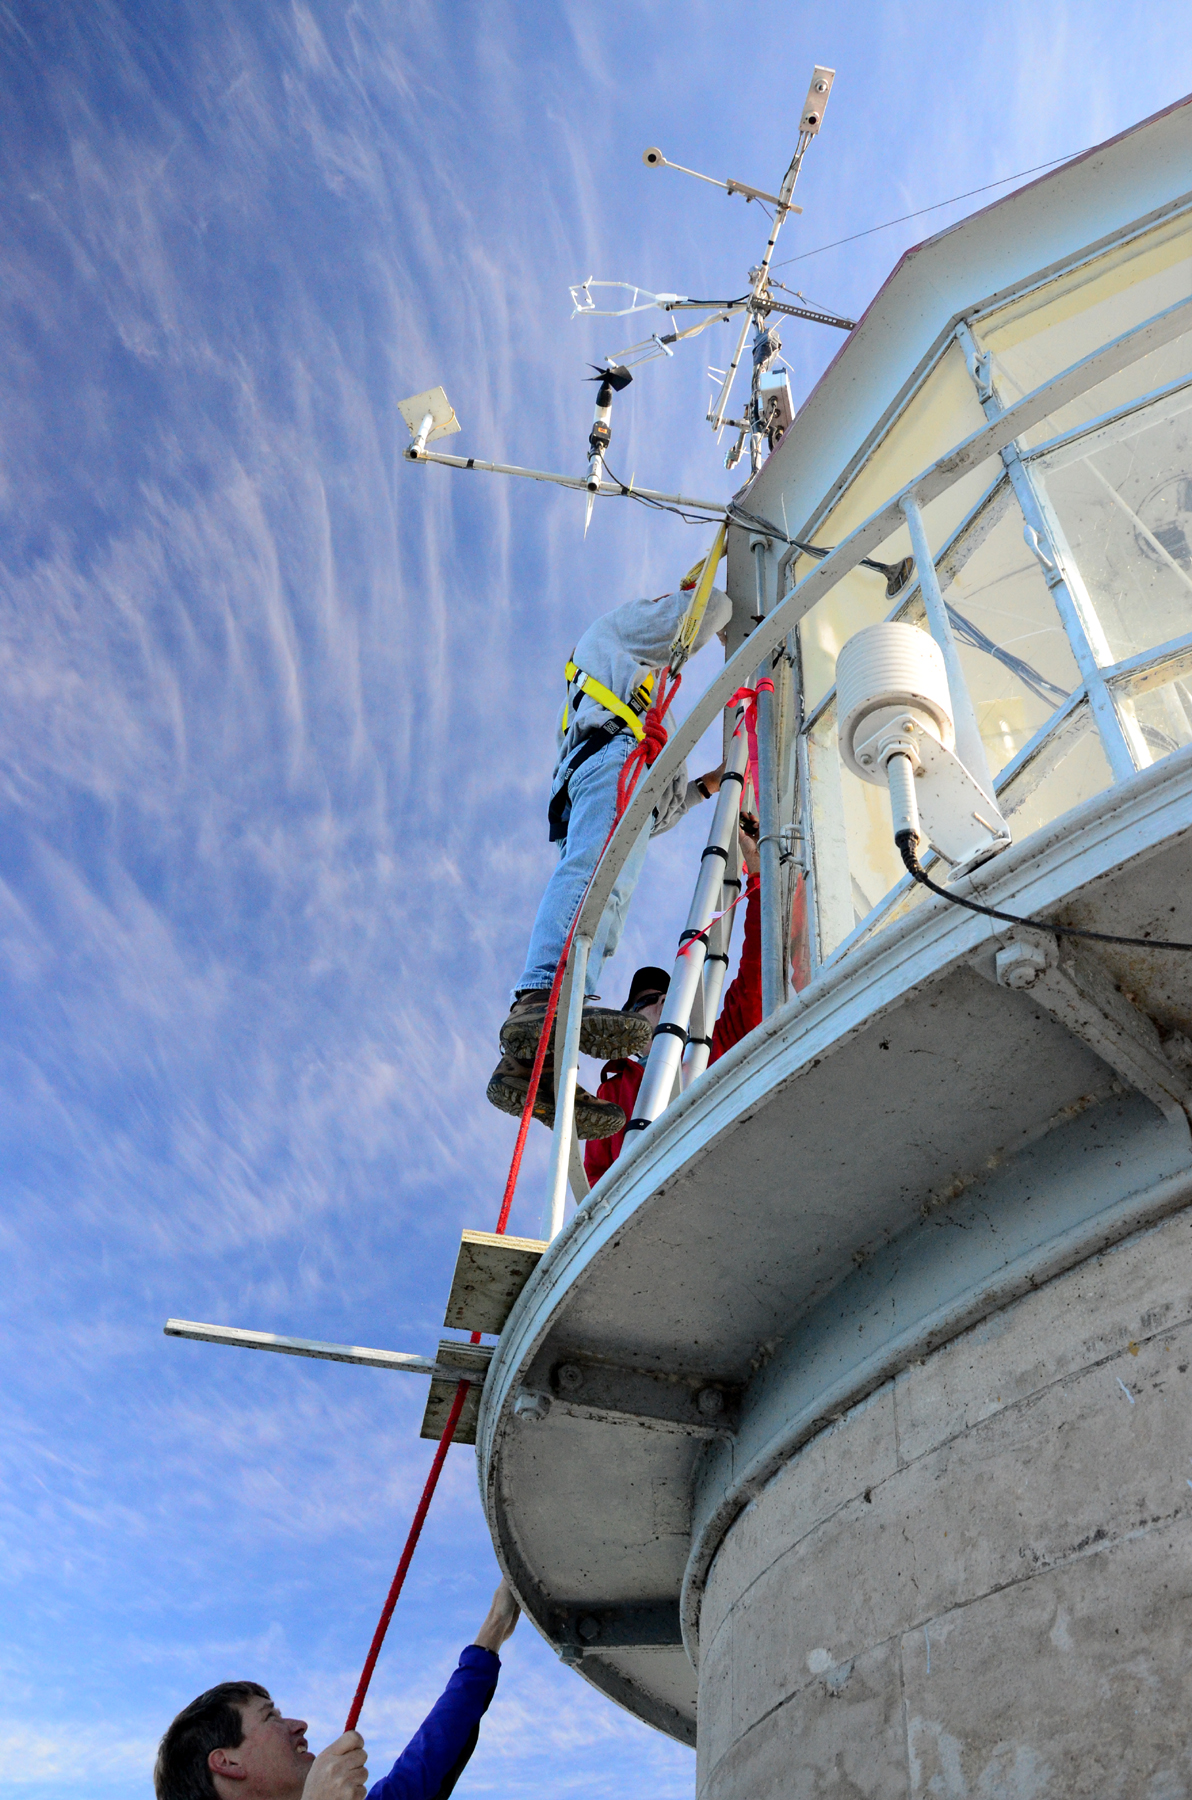 Maintaining the meteorological instruments at Spectacle Reef Lighthouse in Lake Huron, September 2013. Credit: Pakorn Petchprayoon.